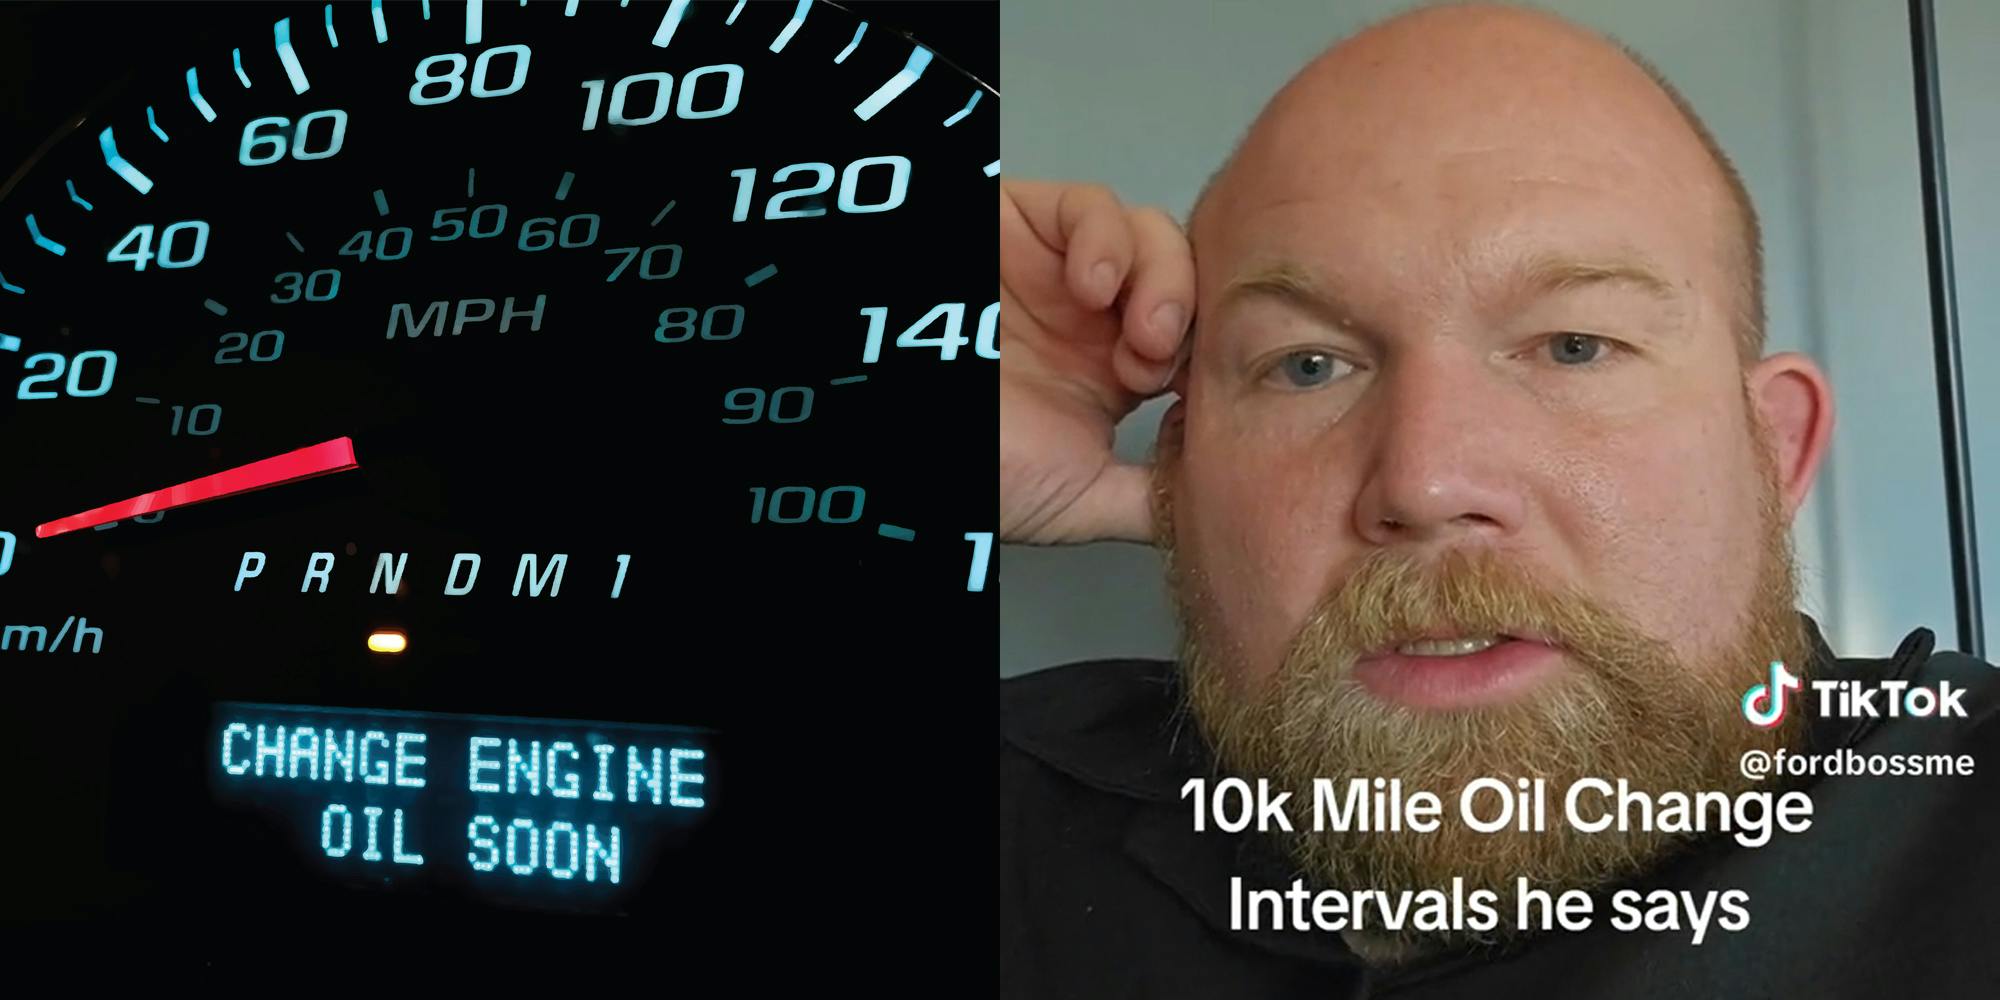 speedometer with "change engine oil soon" message (l) man with caption "10k mile oil change intervals he says" (r)